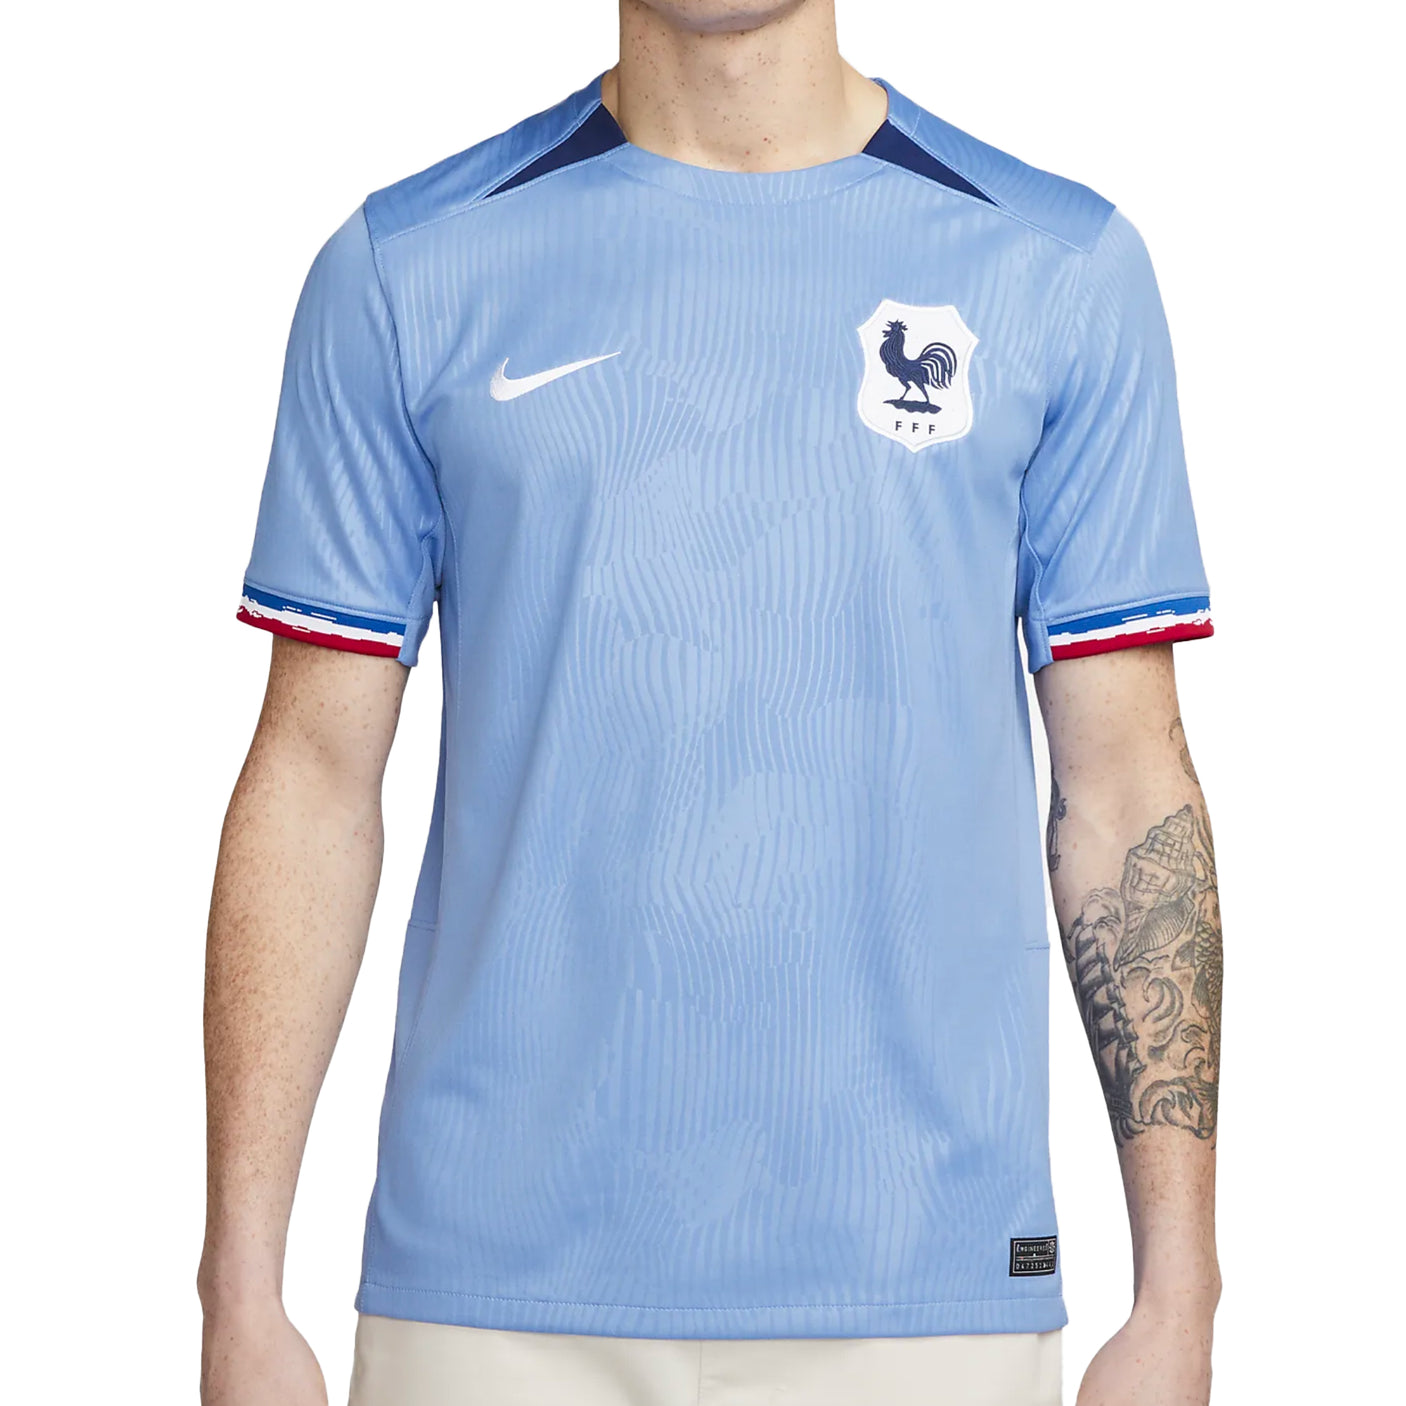 Maillots Compression Nike Pro. Nike FR